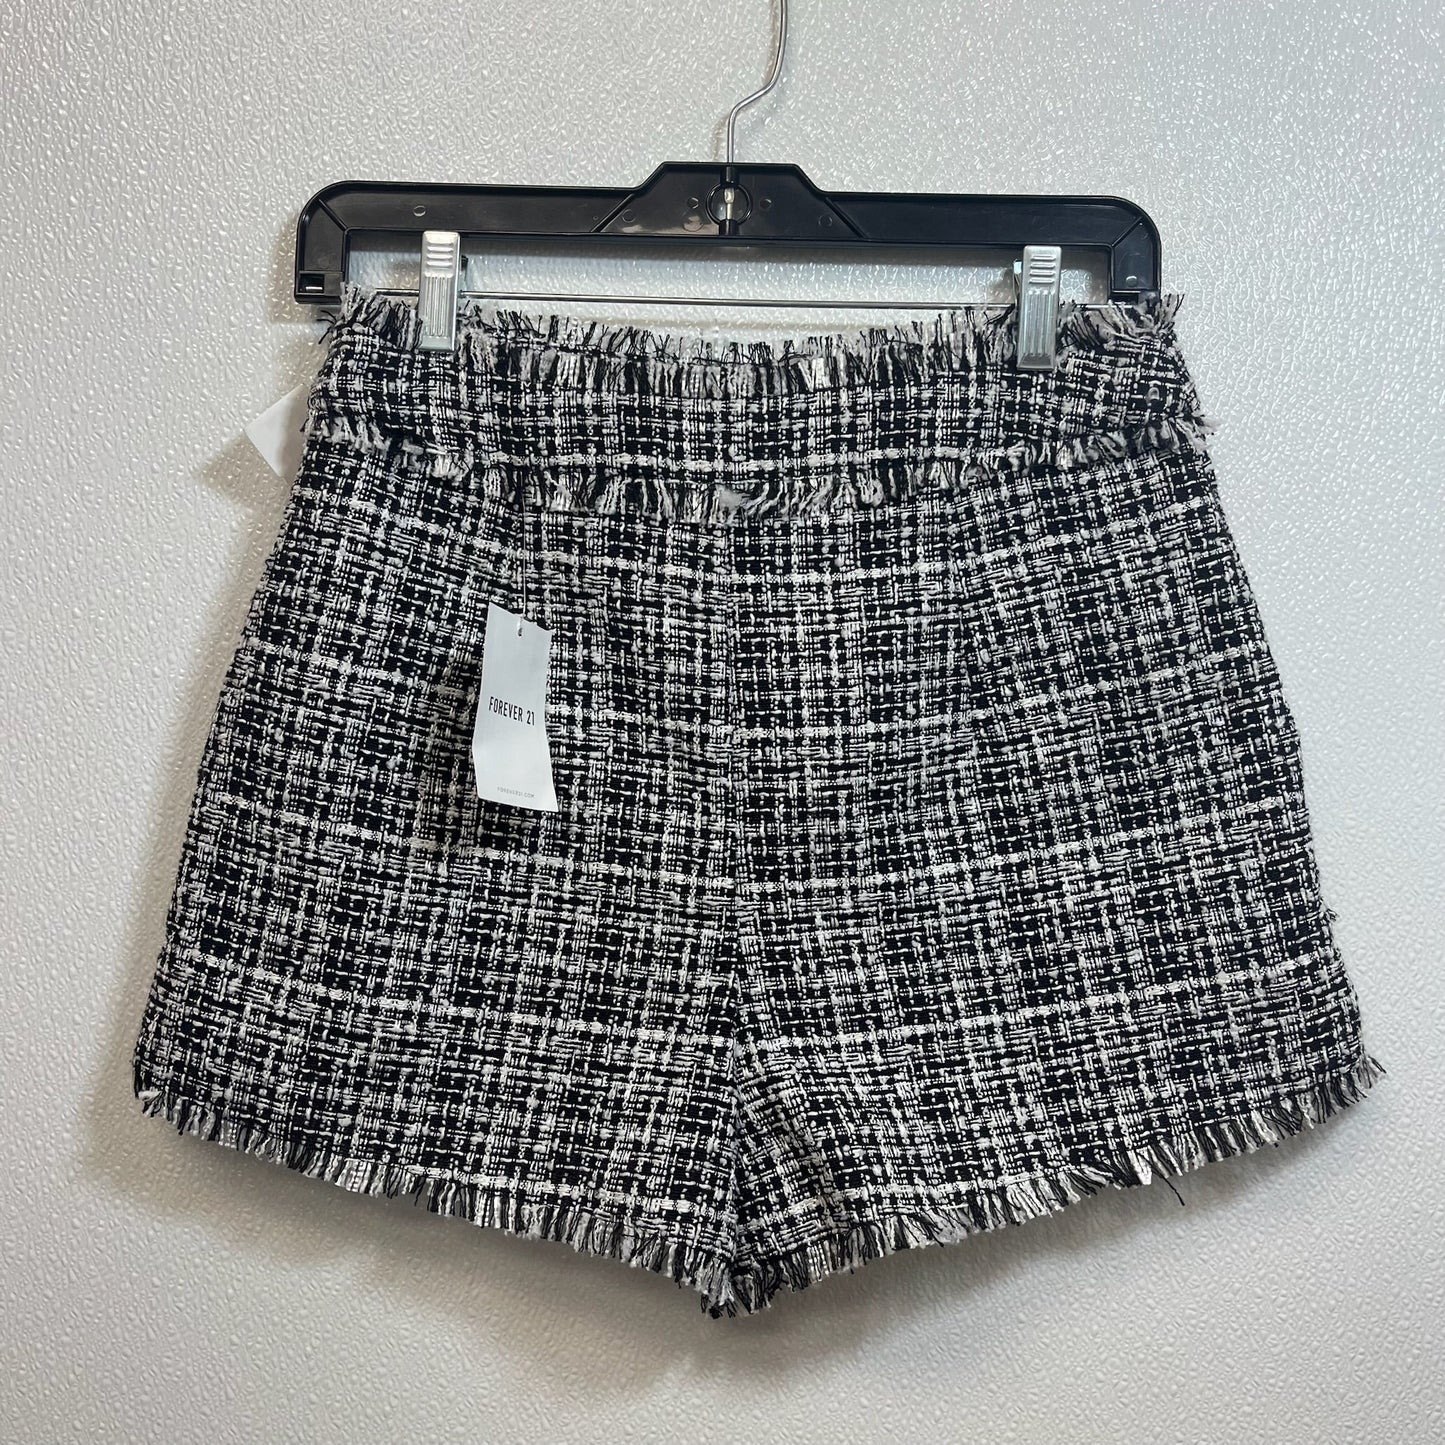 Shorts By Forever 21  Size: M